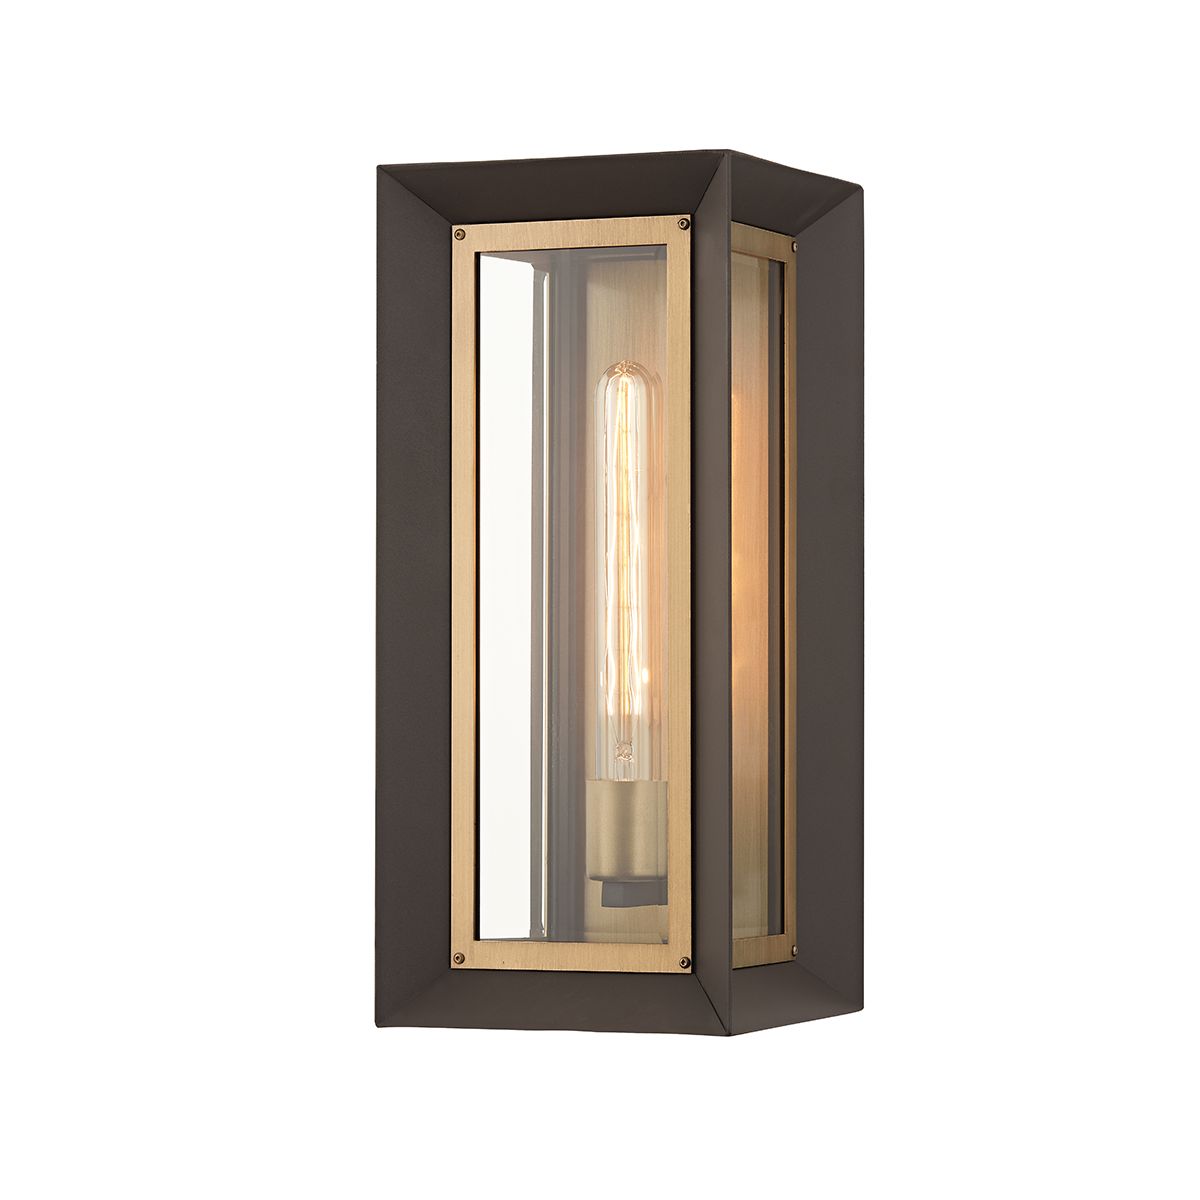 LOWRY 17 in. Outdoor Wall Sconce Textured Bronze Finish